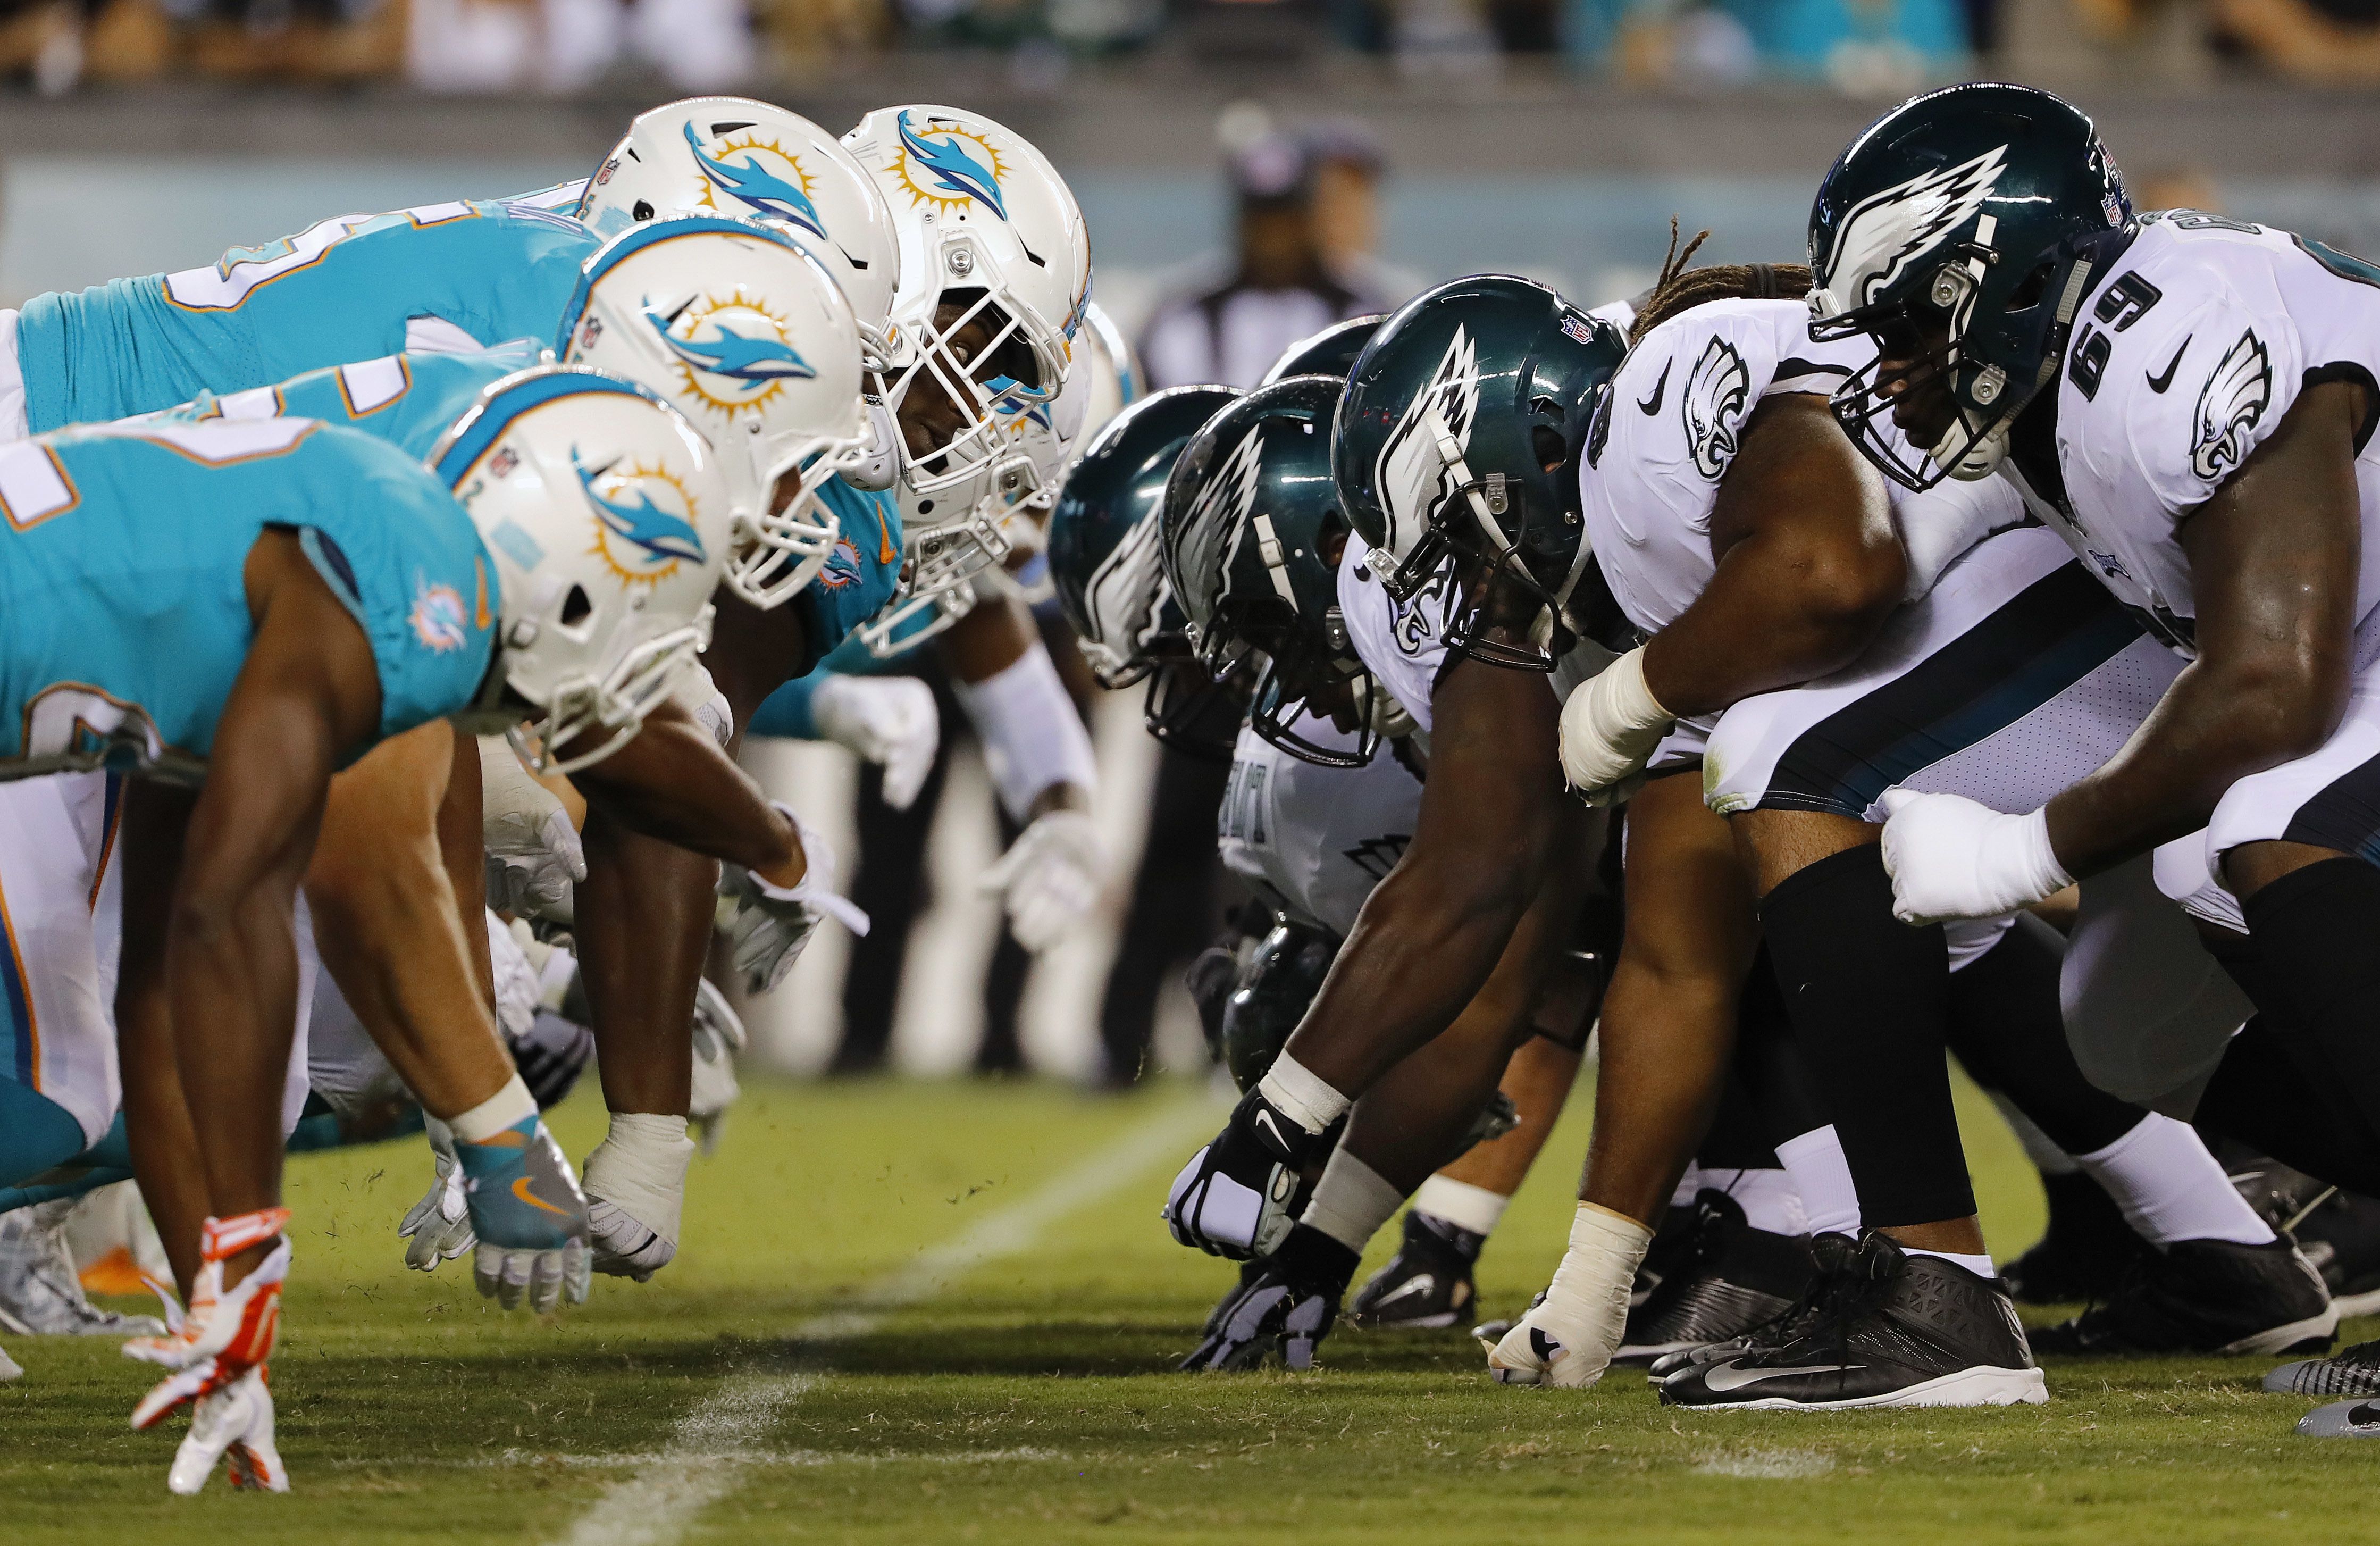 Watch Dolphins vs. Eagles